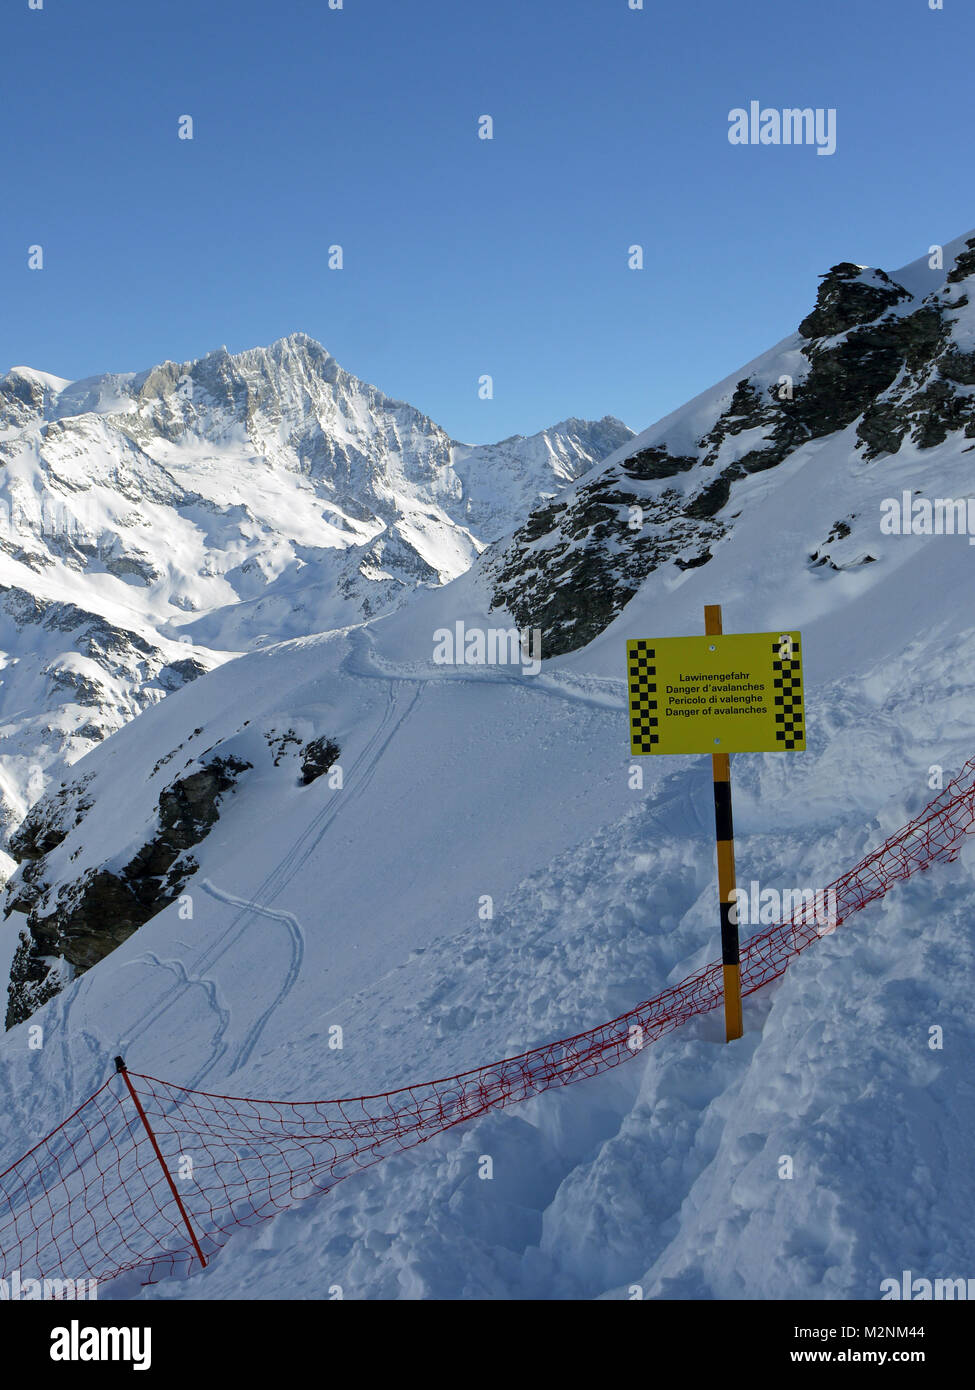 Winter scenes in the snowsports resort of Zinal in Valais canton of Switzerland and showing the avalanche warning sign at start of the free ride area. Stock Photo